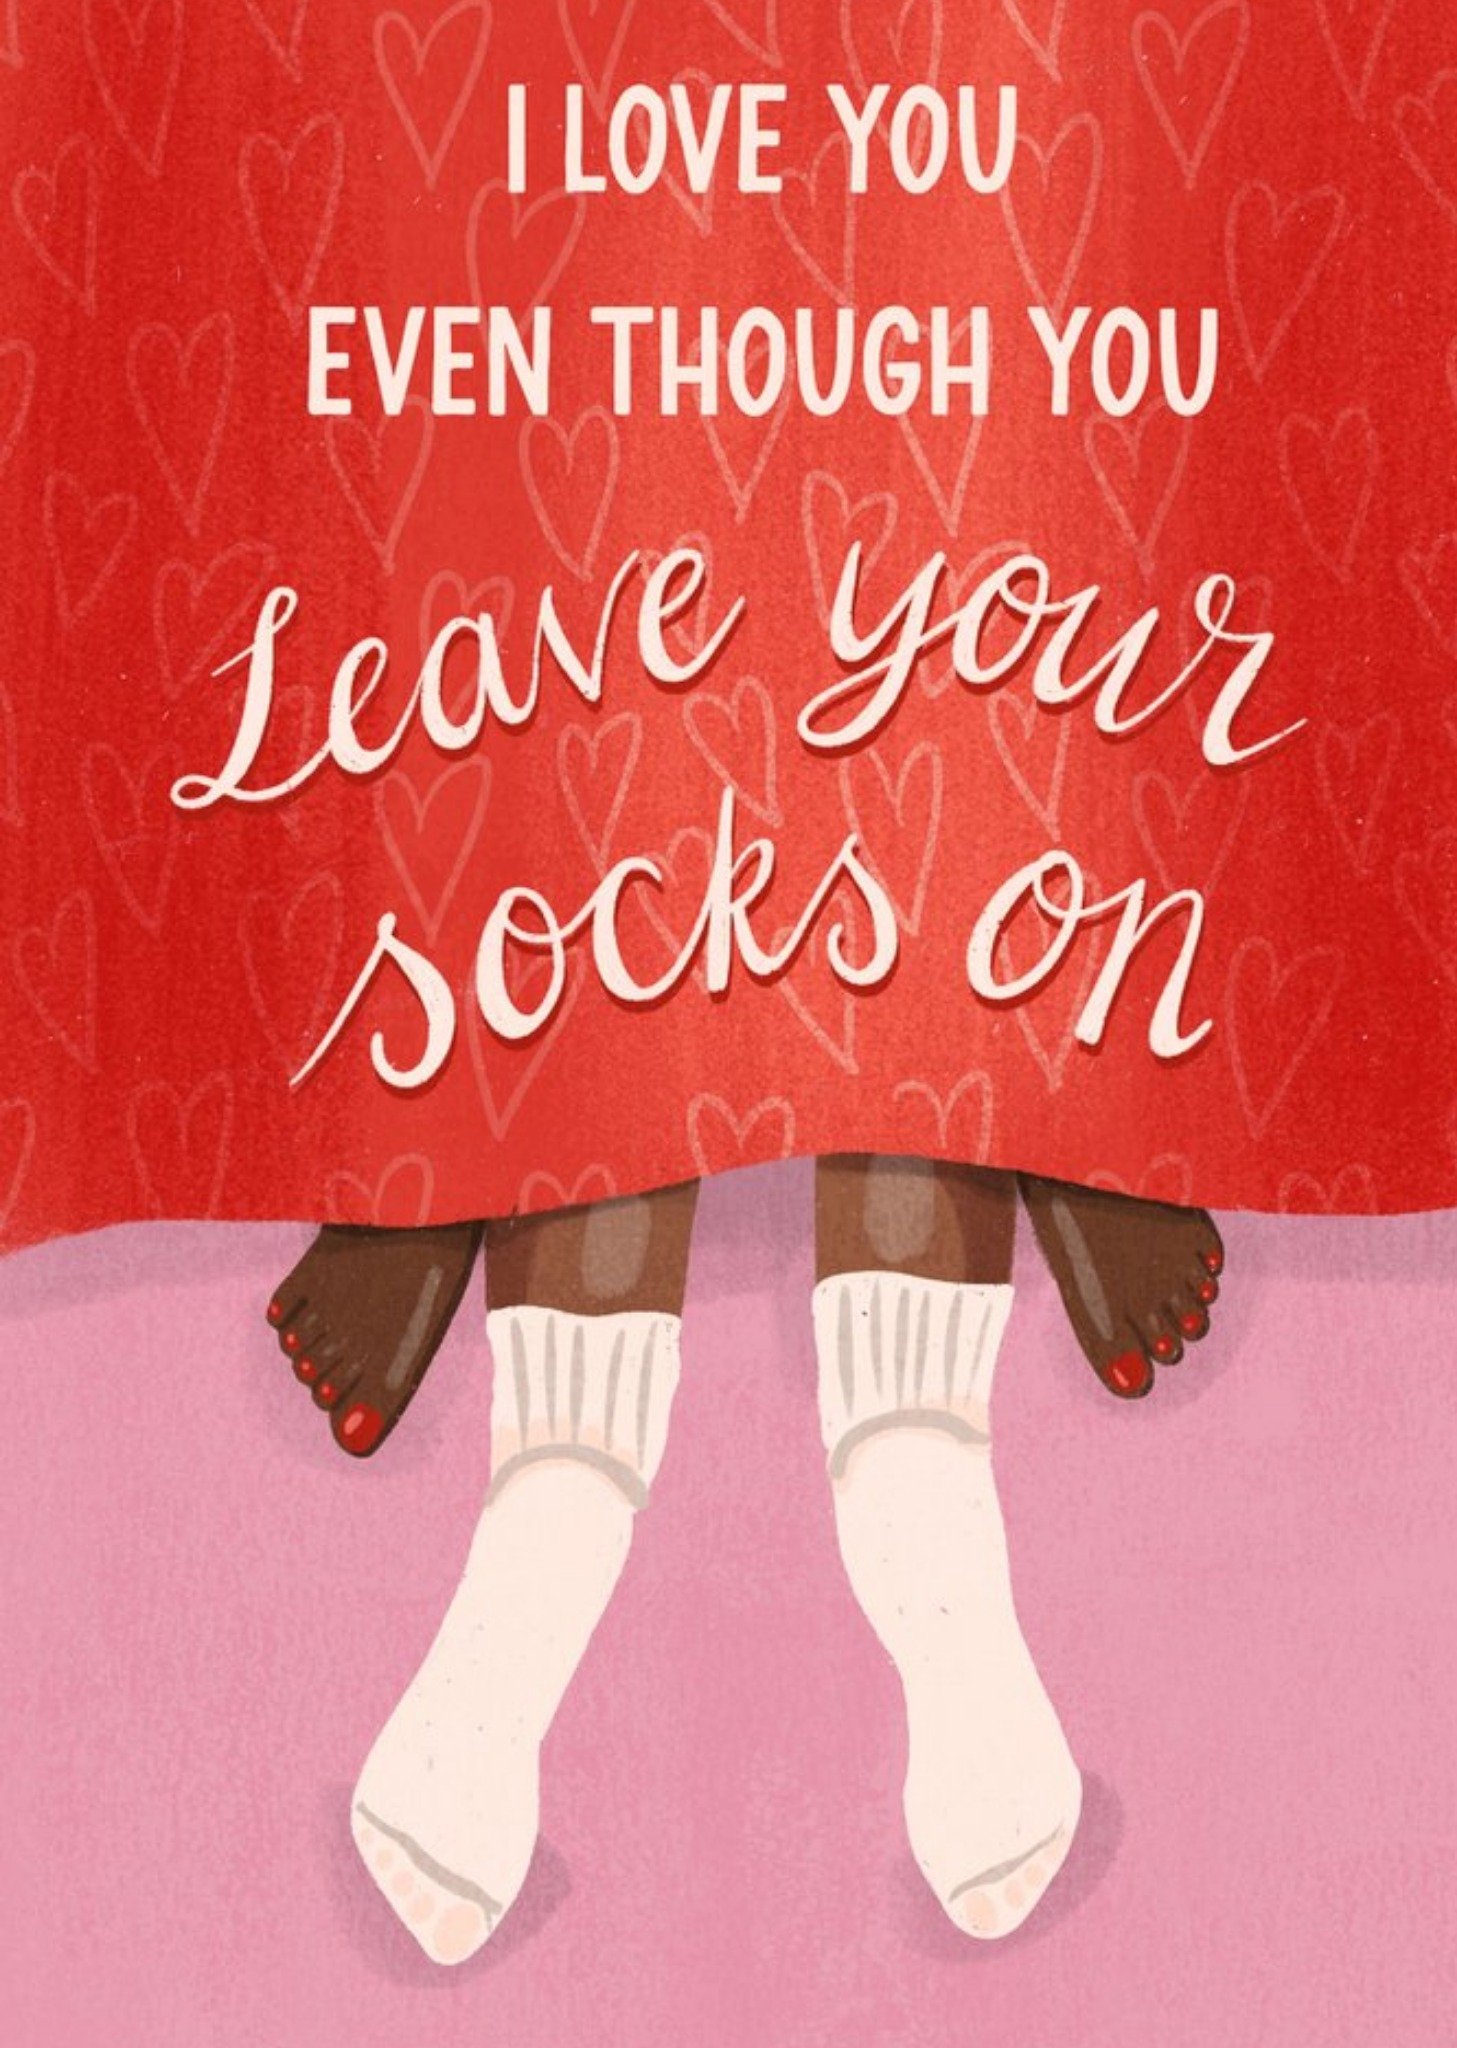 Moonpig Funny I Love You Even Though You Leave Your Socks On Valentine's Day Card, Large